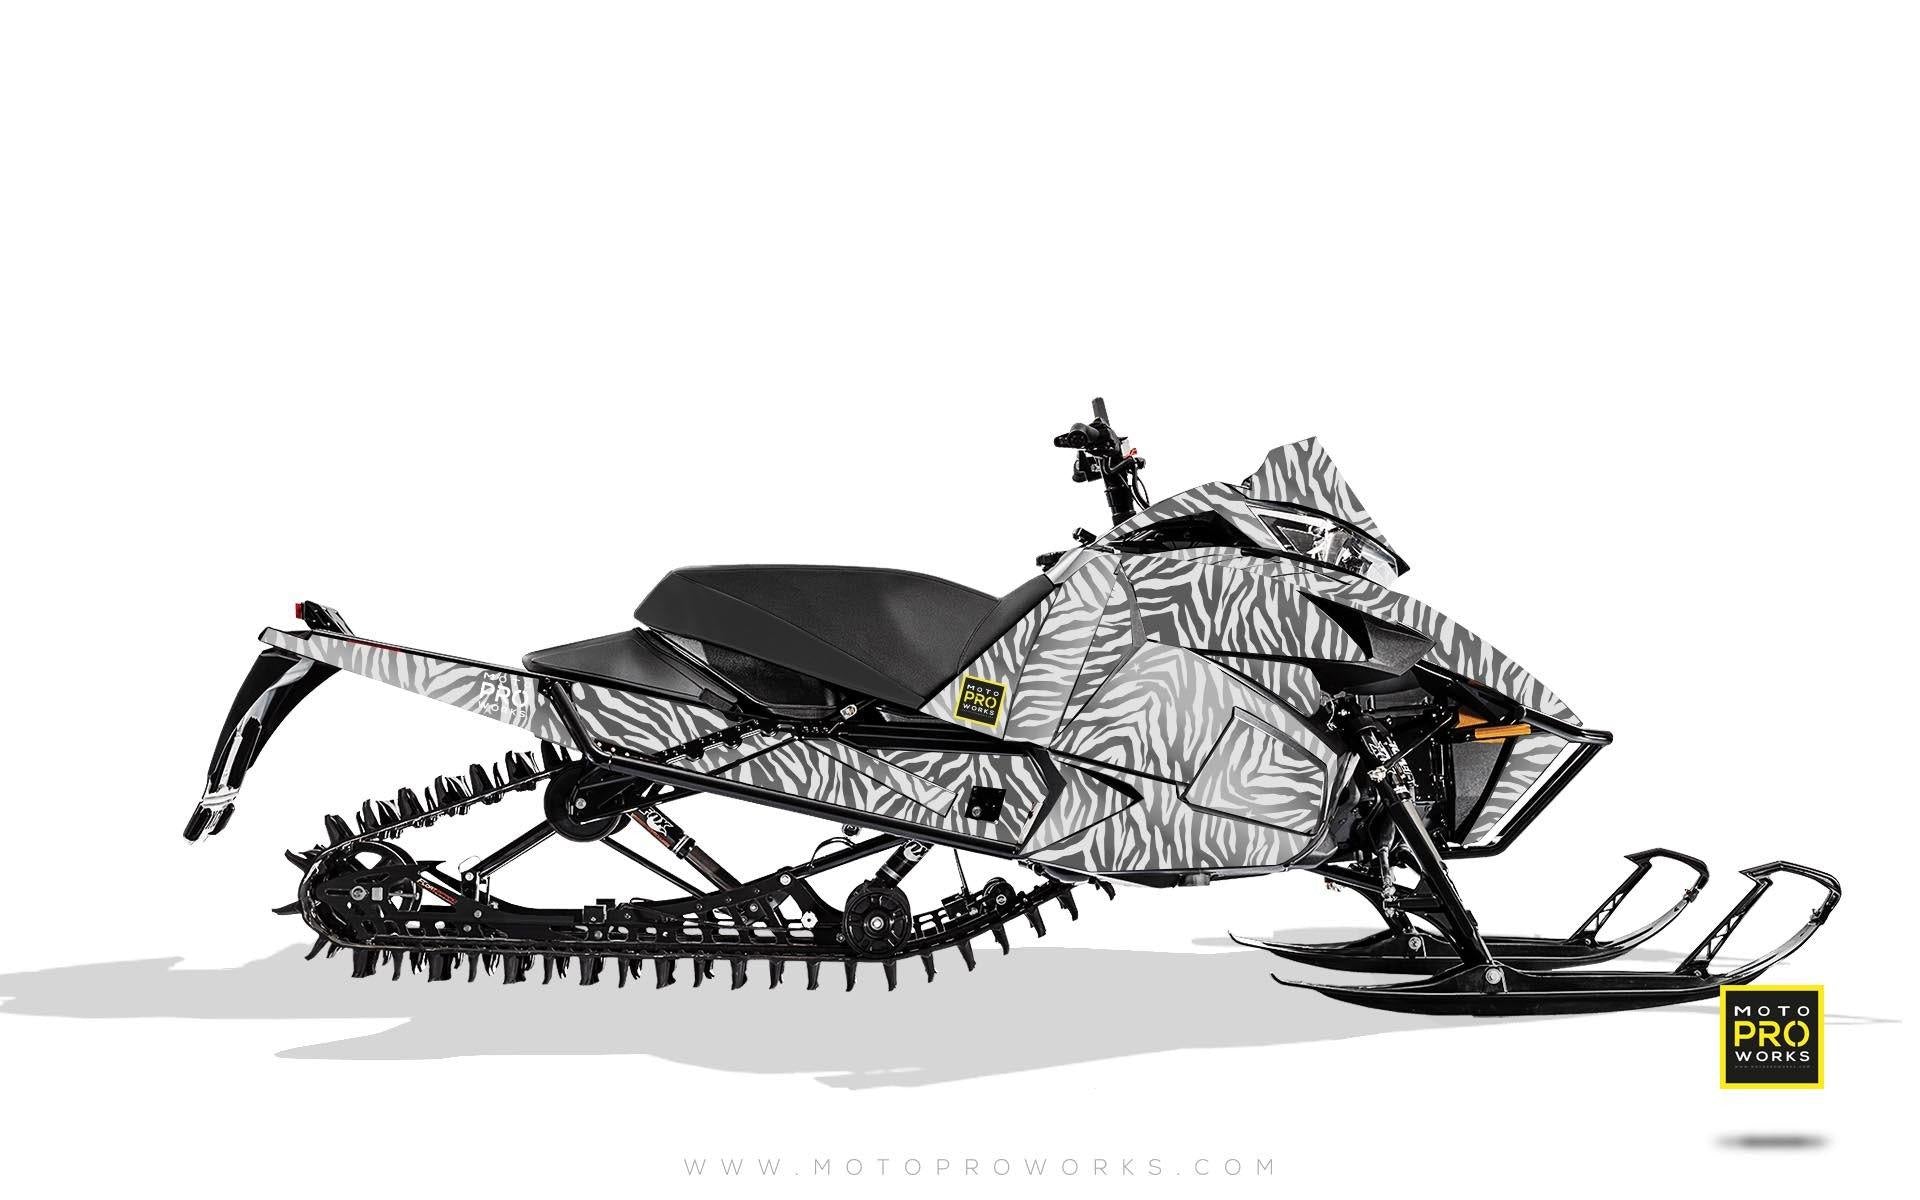 Arctic Cat Graphics - "Stripey" (white) - MotoProWorks | Decals and Bike Graphic kit